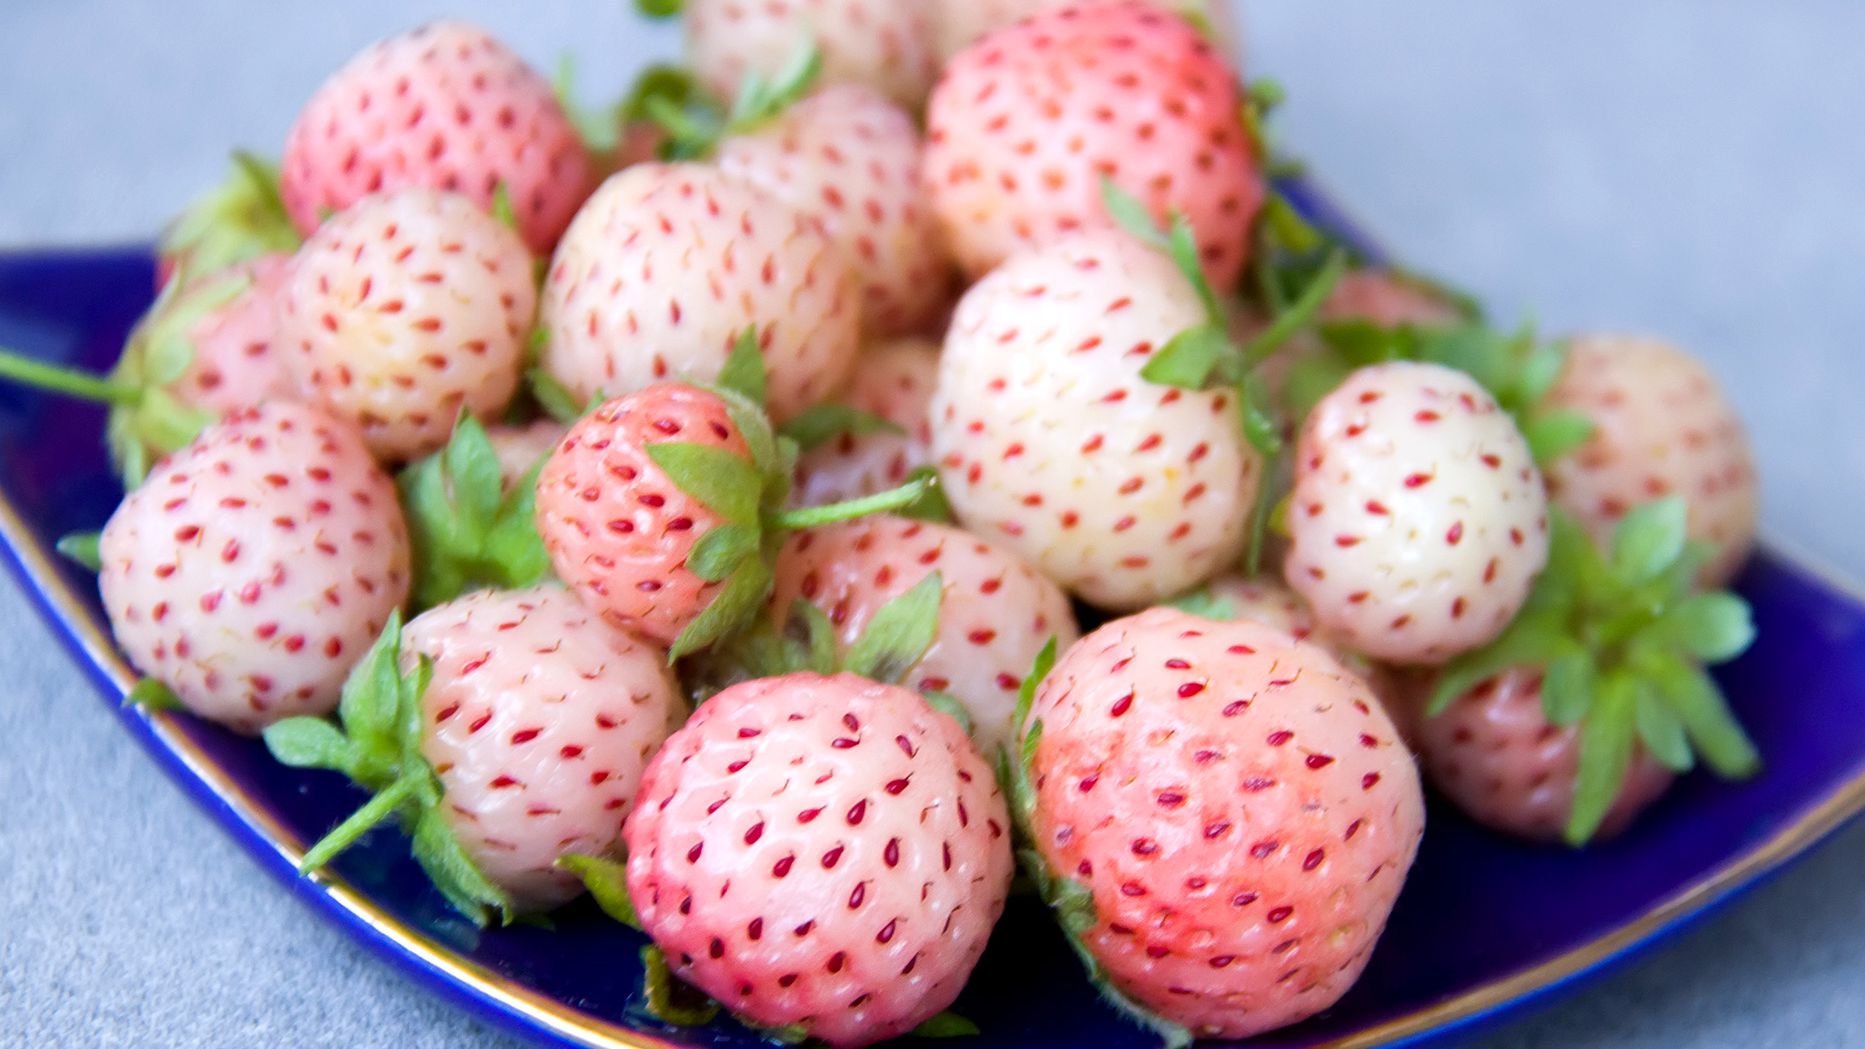 Does Costco have pineberries?